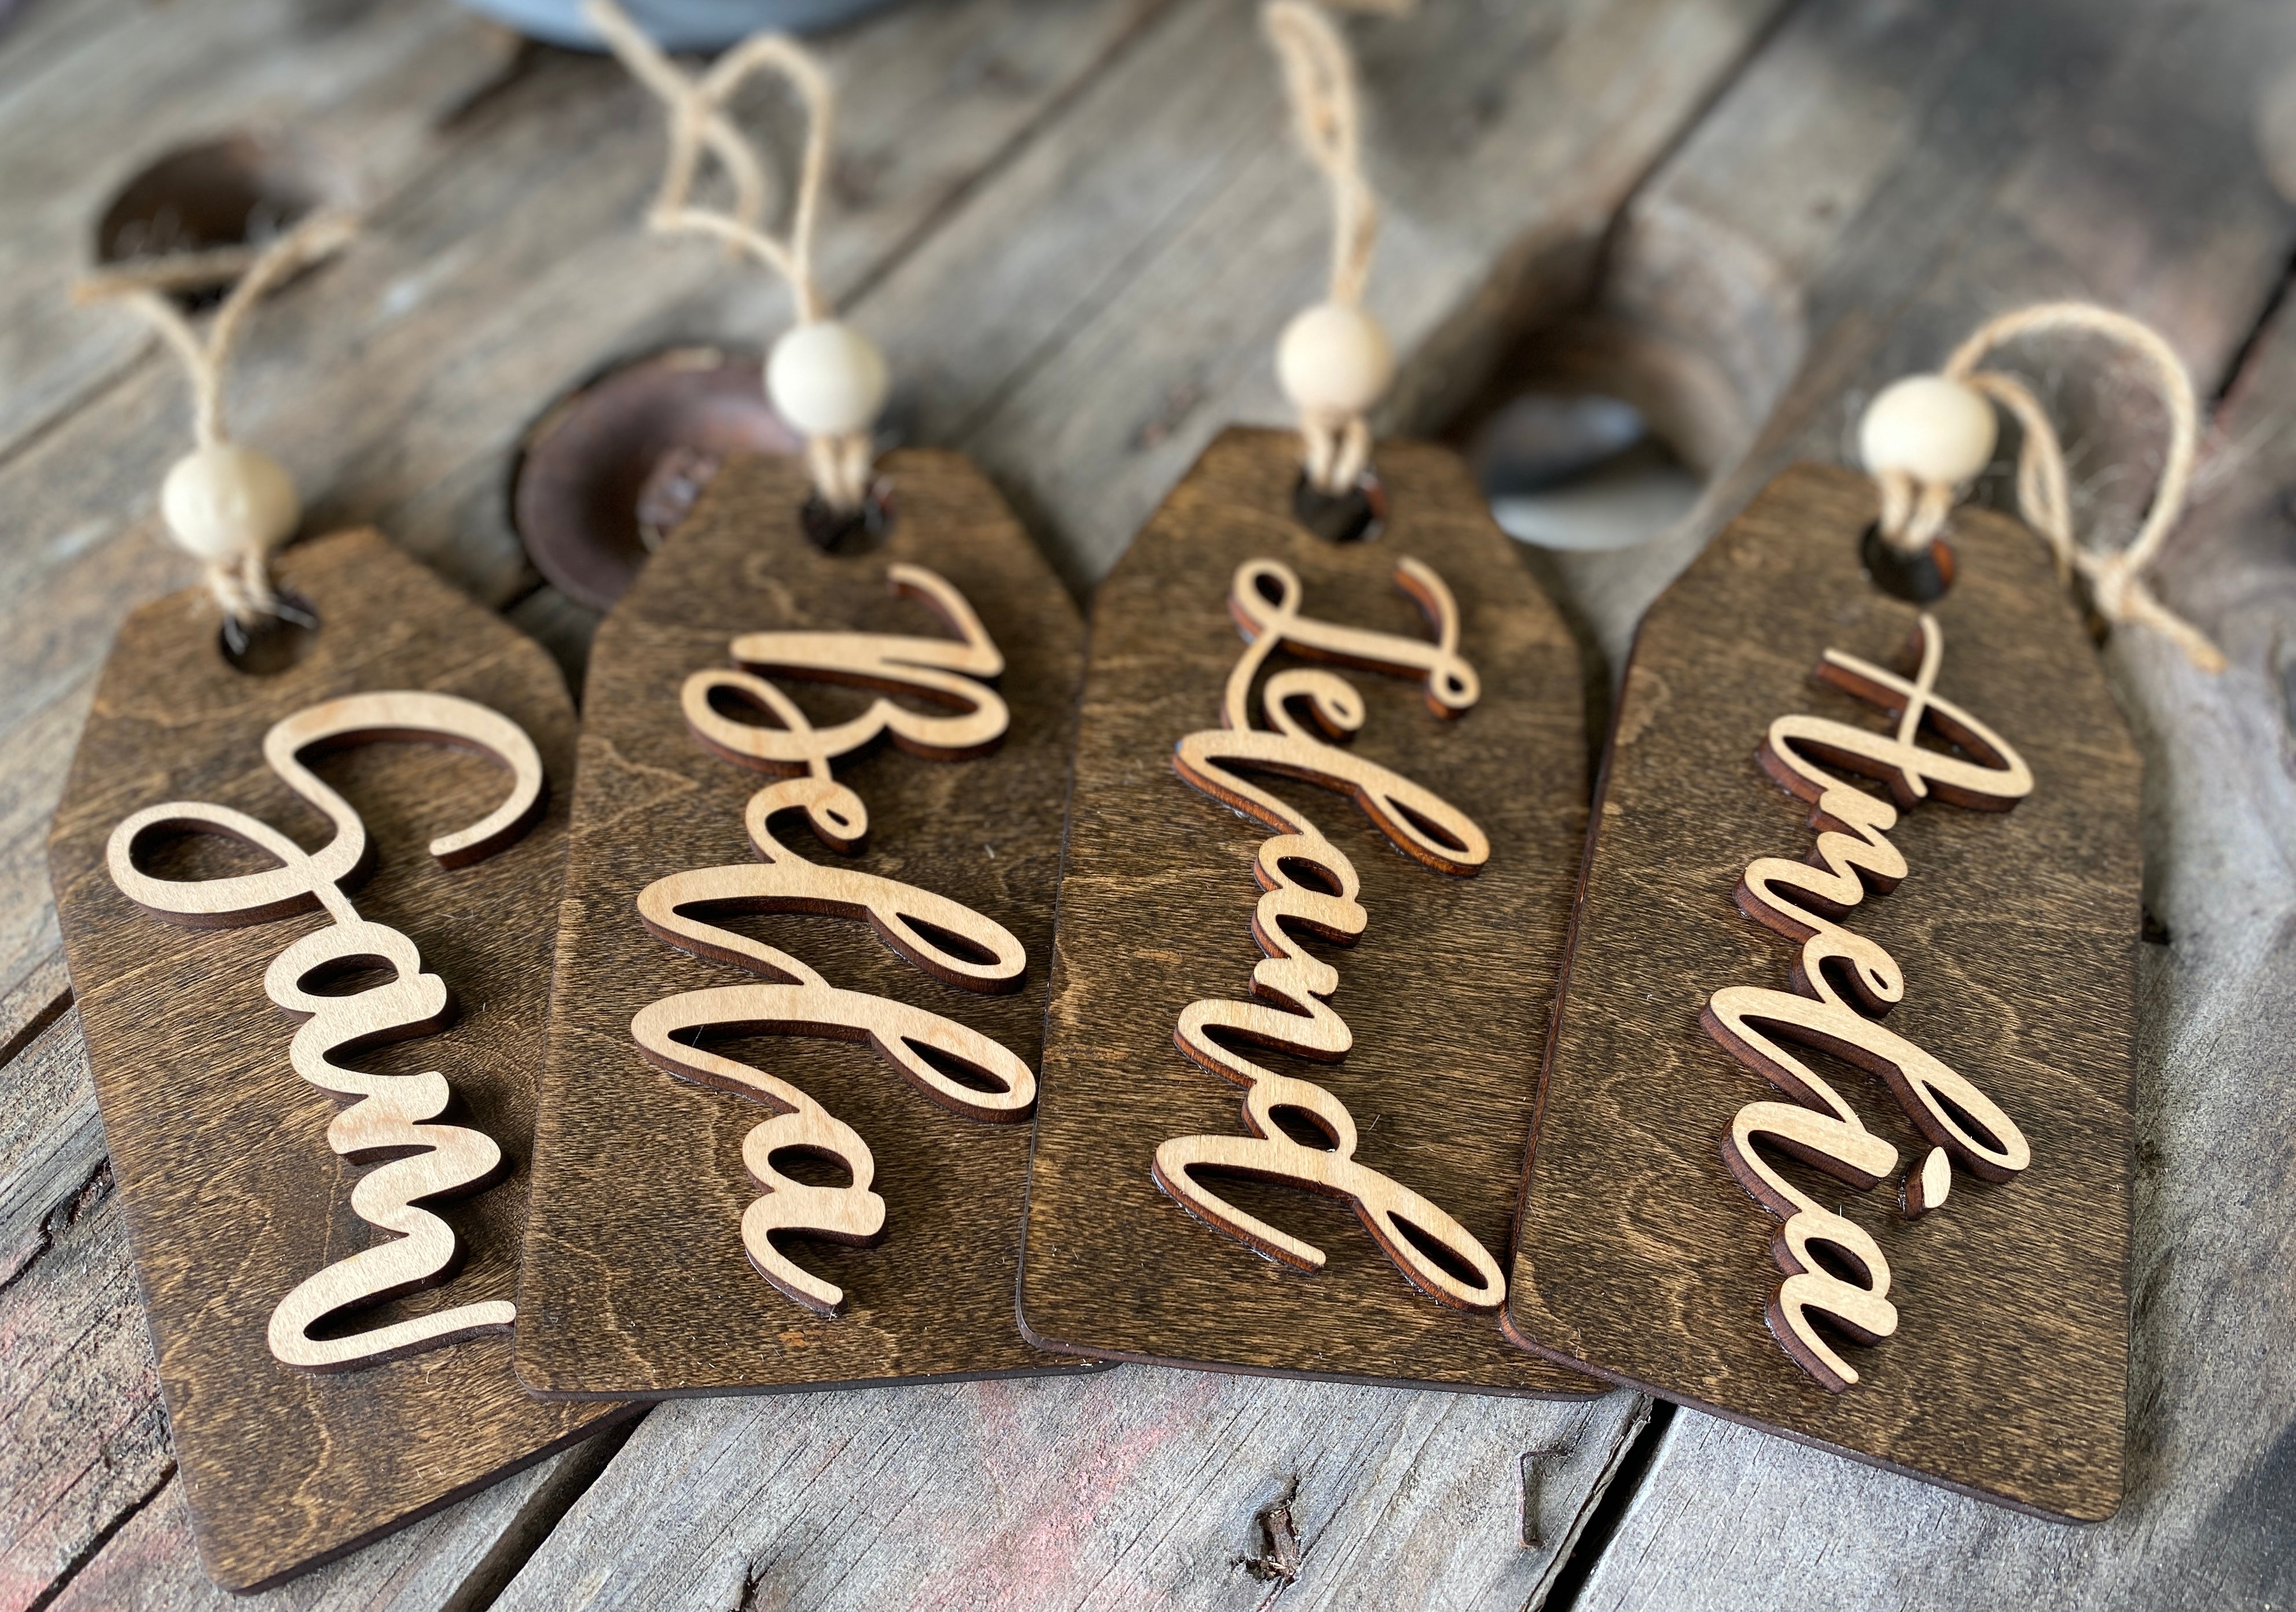 Personalized Wood Stocking Tag – Signs by Caitlin